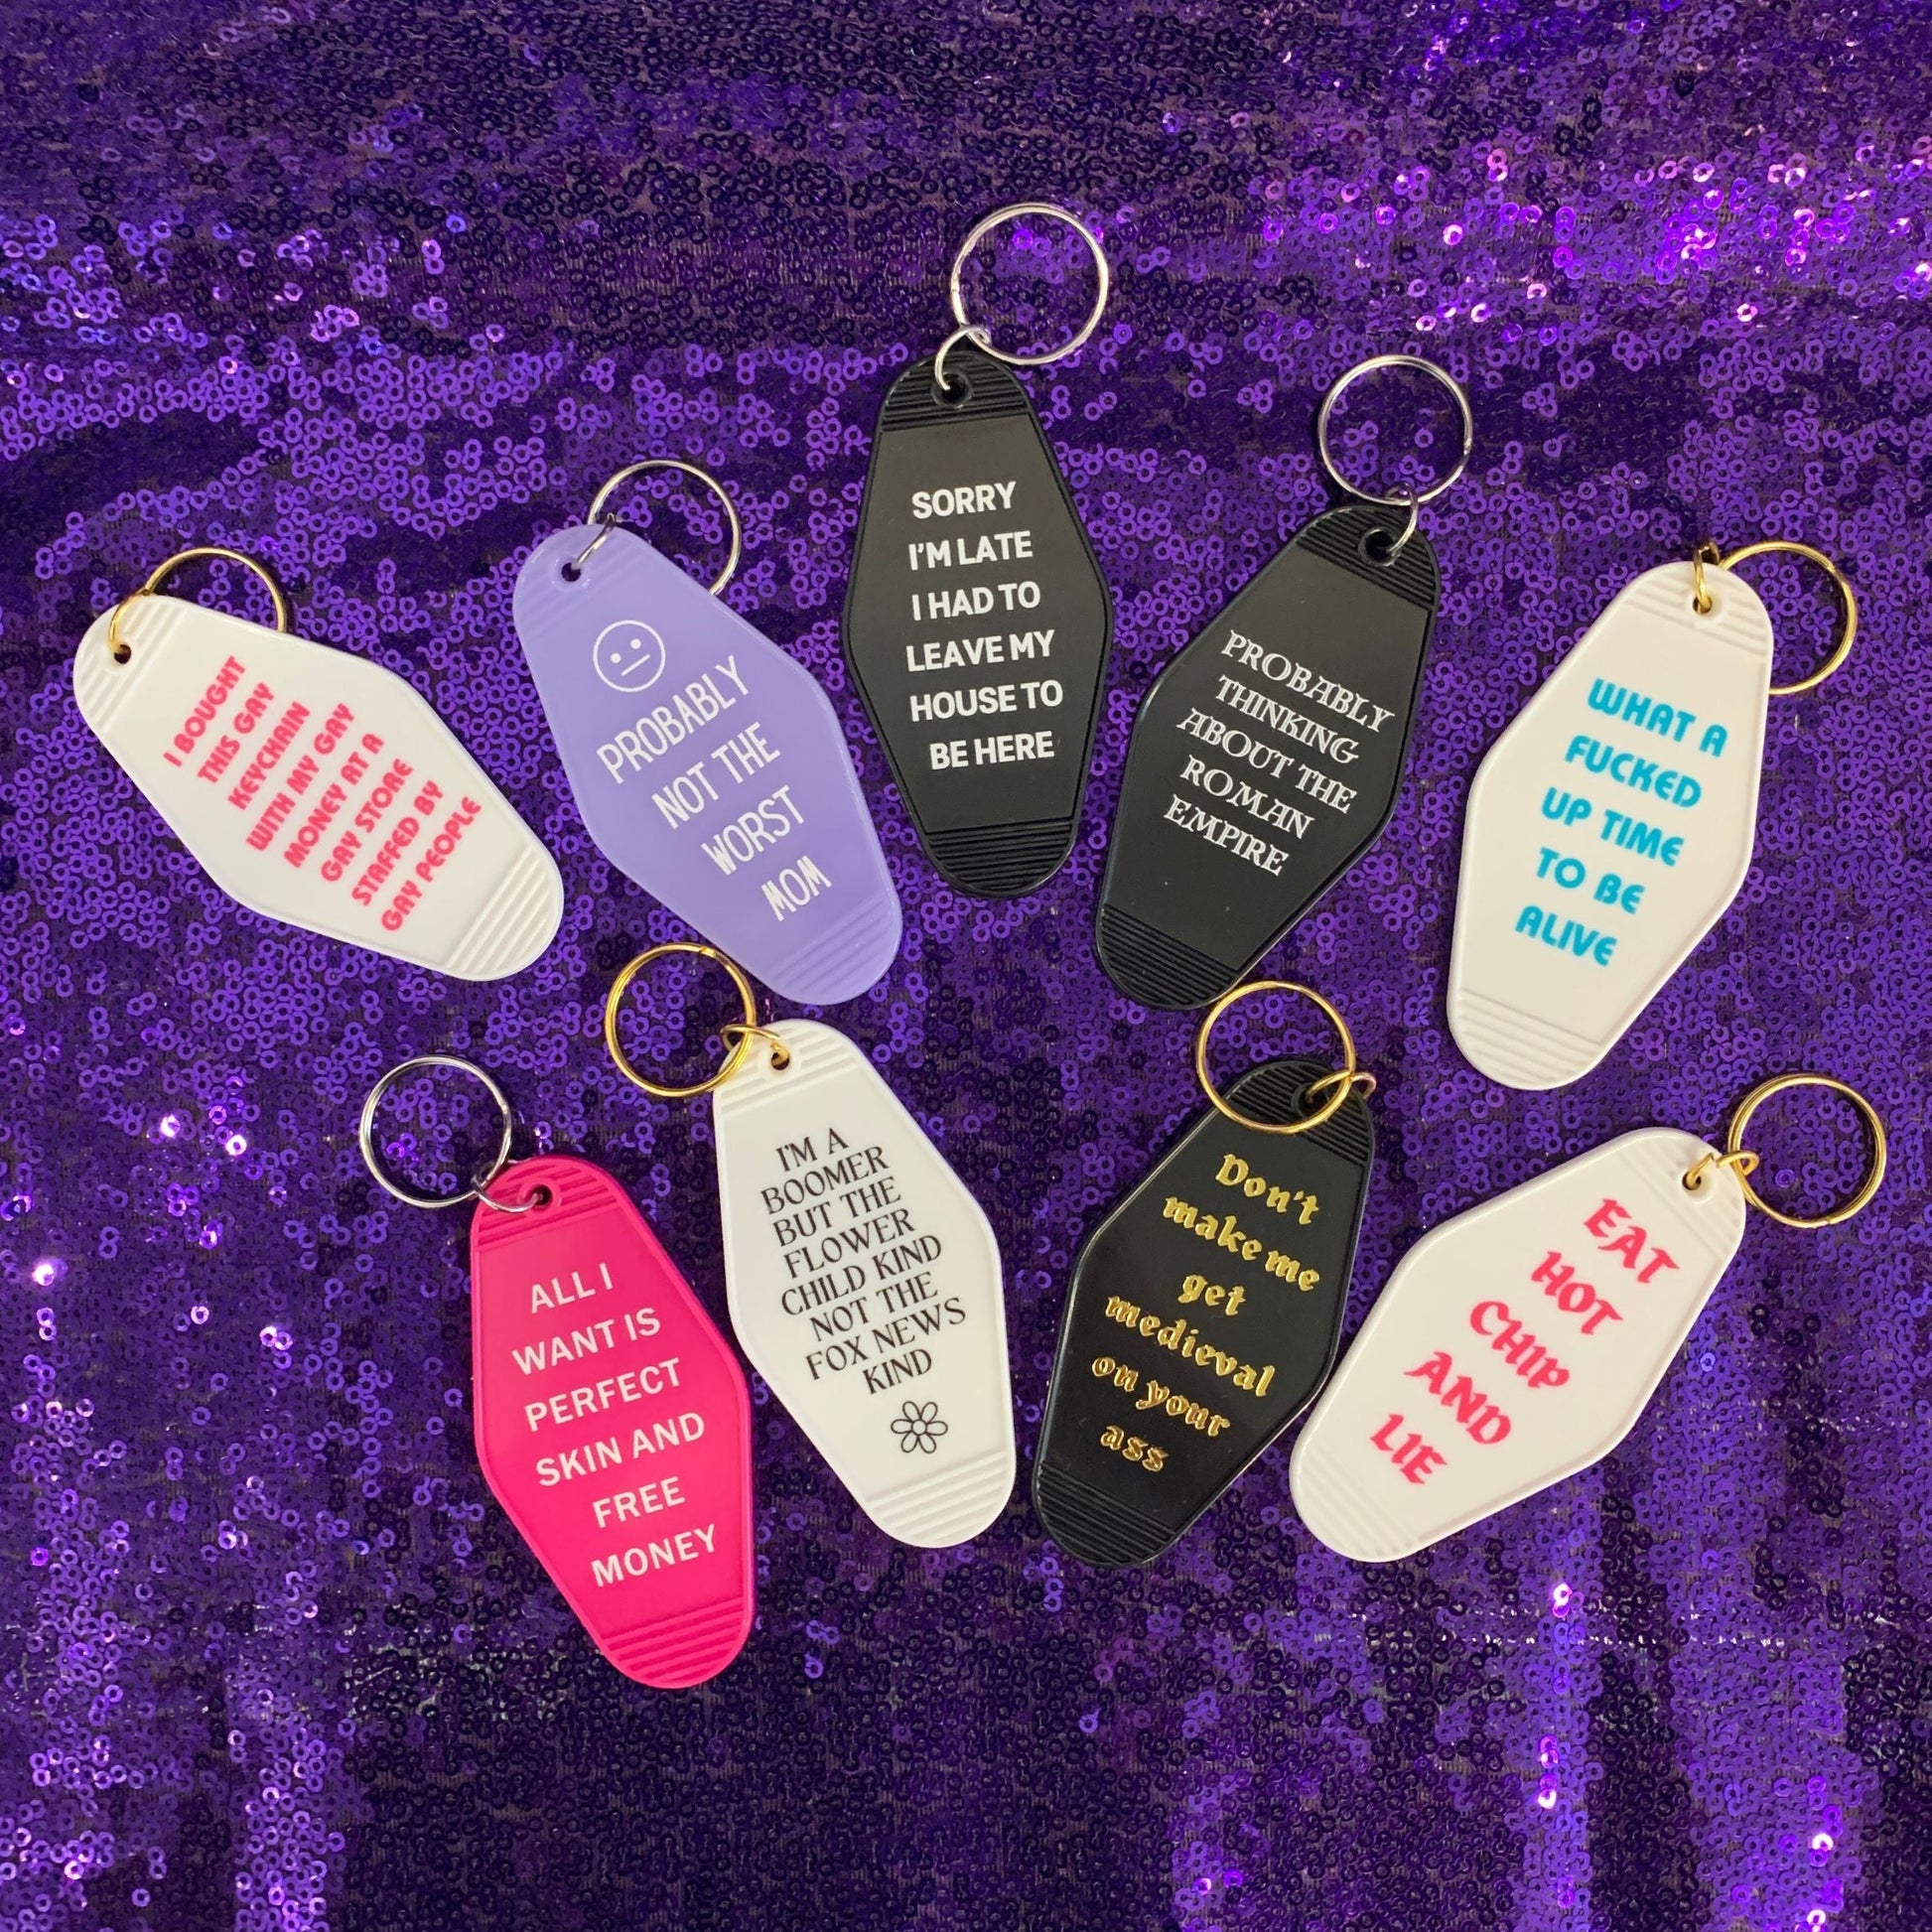 Probably Not the Worst Mom Motel Style Keychain in Purple